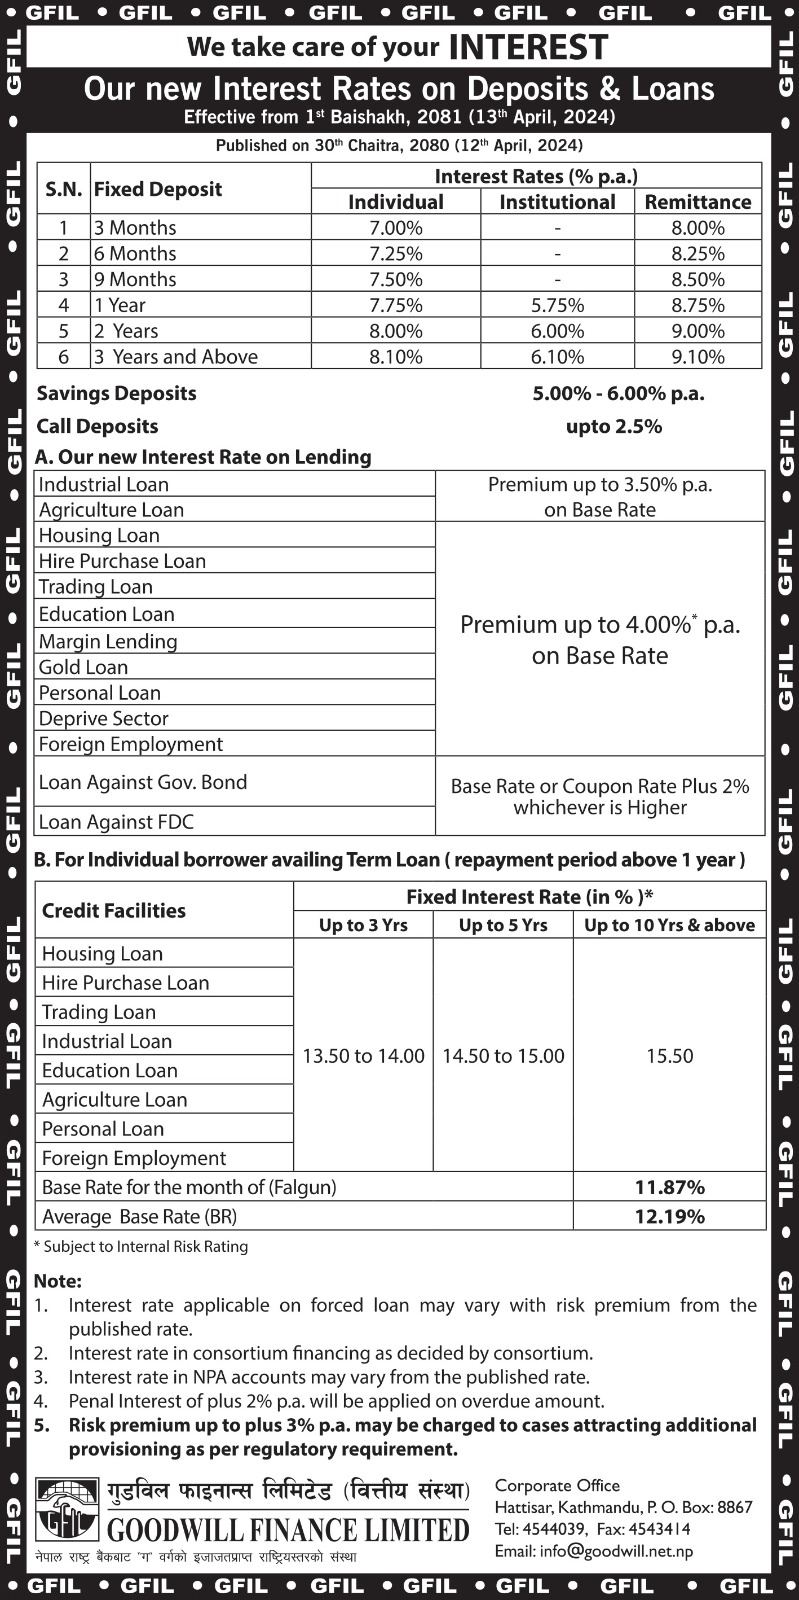 Interest rate on Deposit and loans effective from 13th April, 2024	